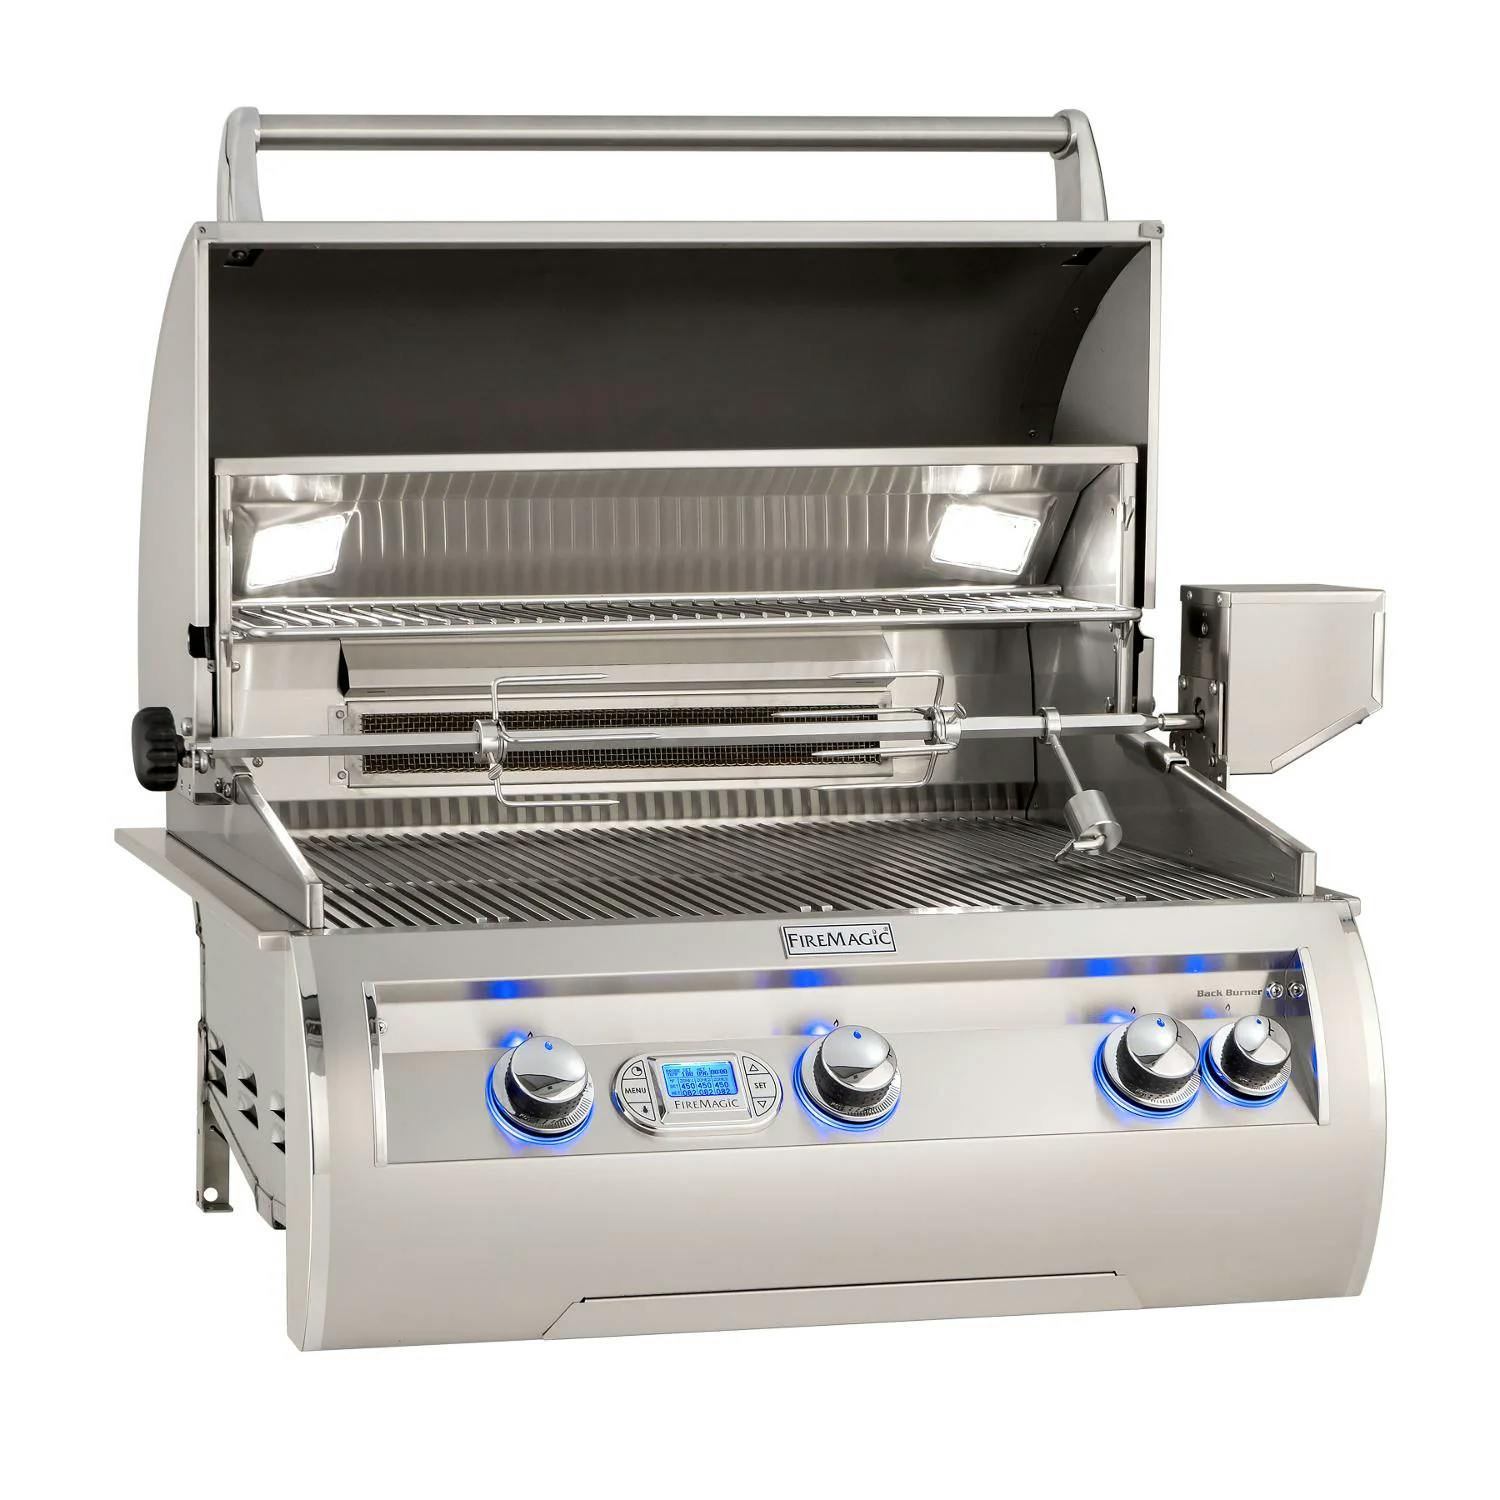 Fire Magic Echelon Diamond Built-in Gas Grill with One Infrared Burner, Rotisserie, & Digital Thermometer